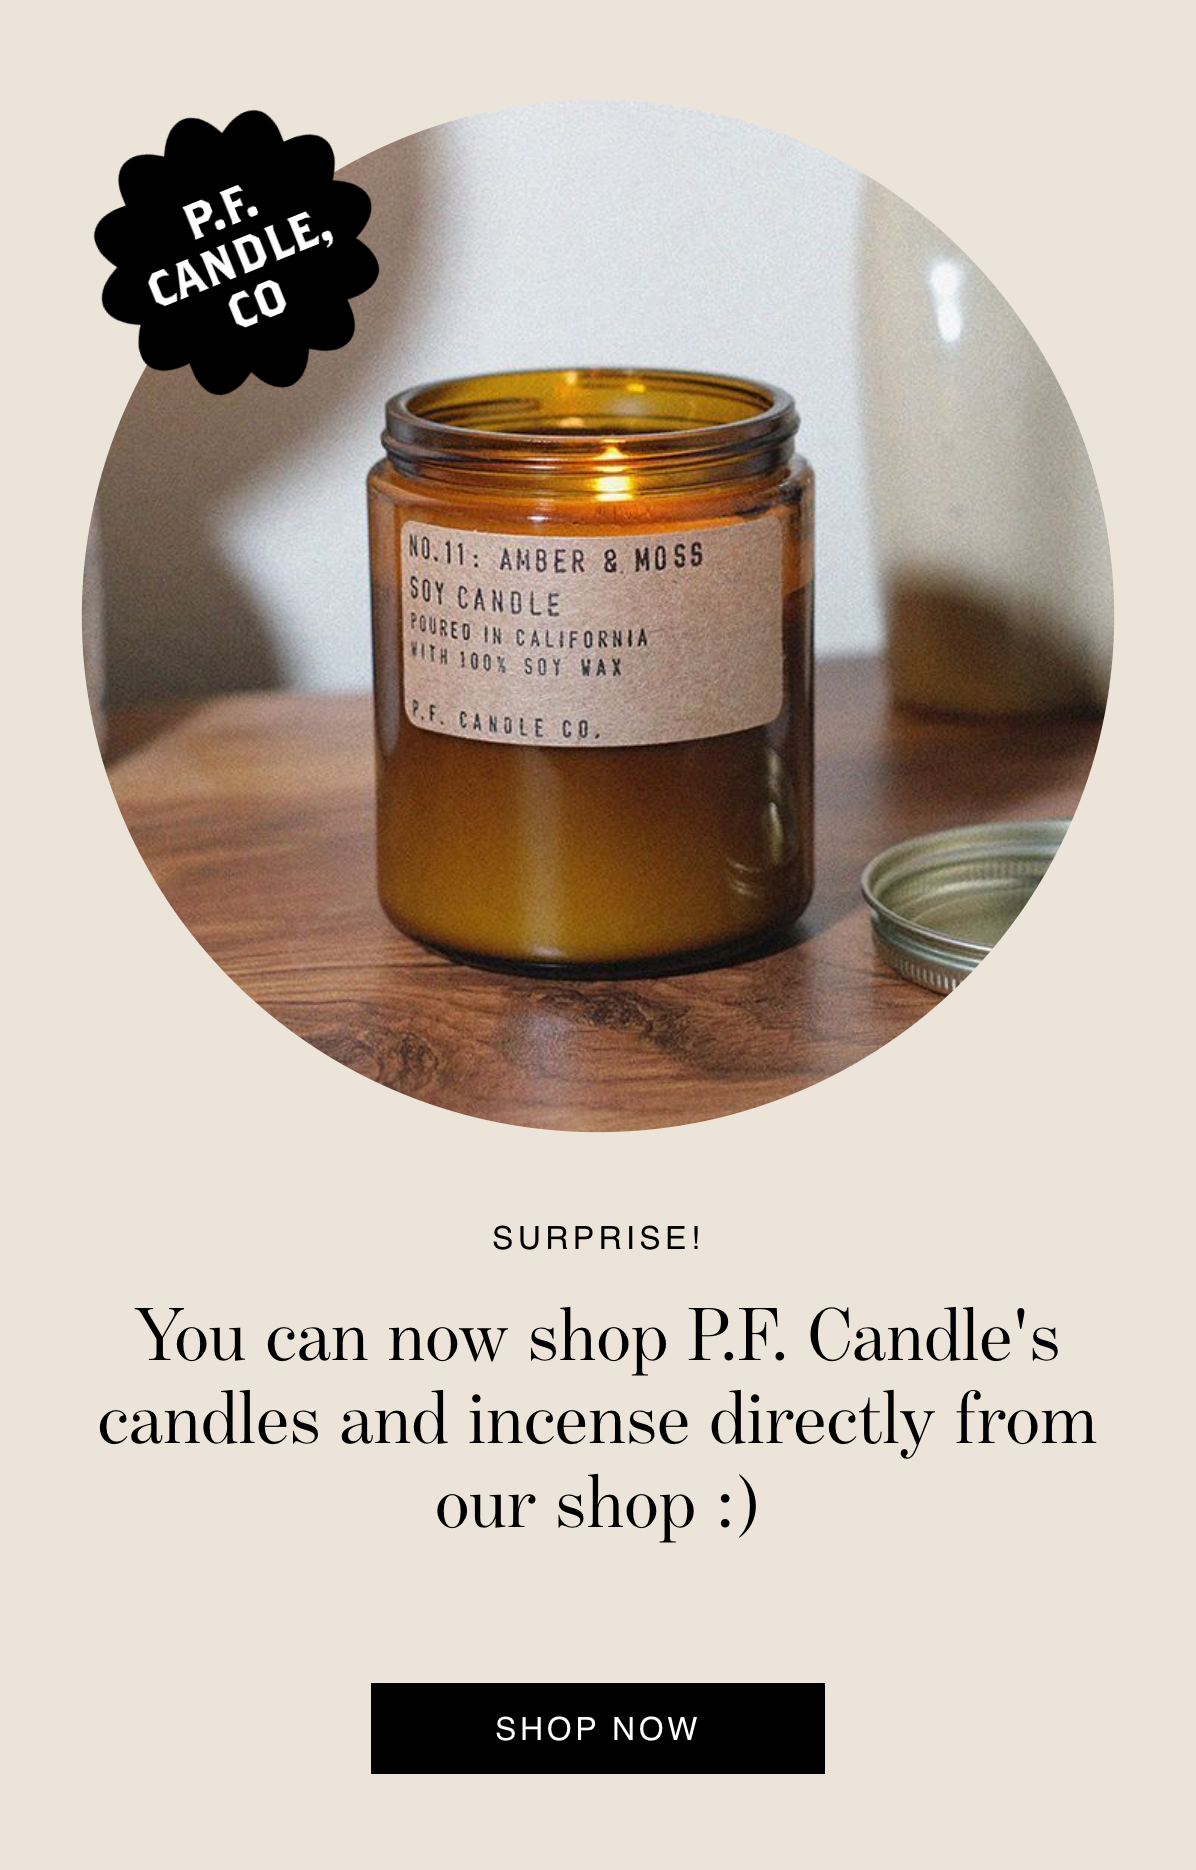 P.F. Candle is now available in our shop!